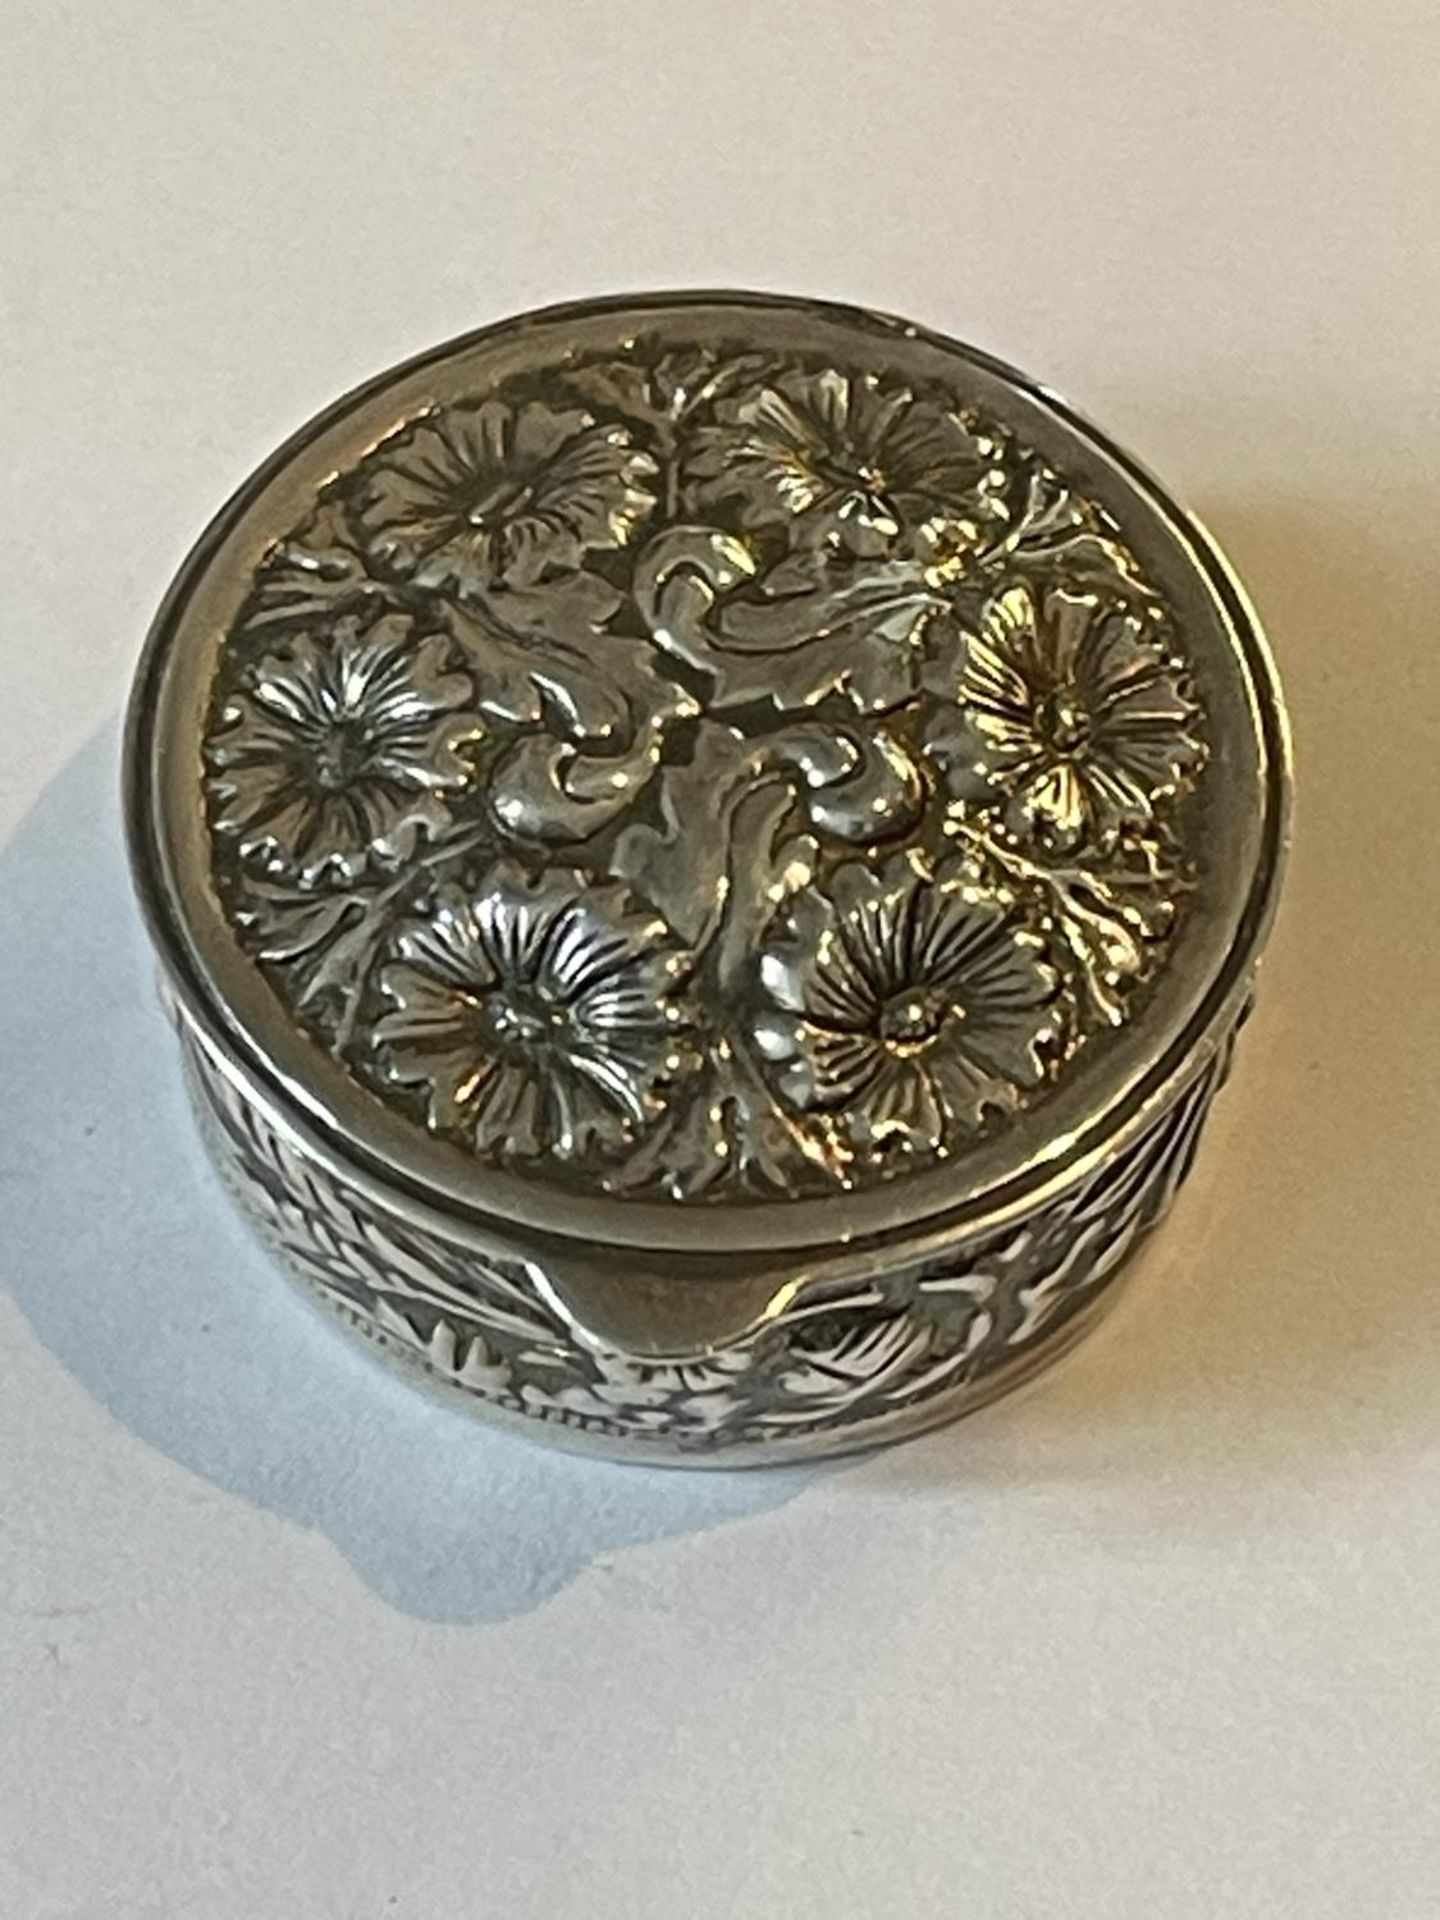 A SILVER CIRCULAR PILL BOX WITH FLORAL DECORATION